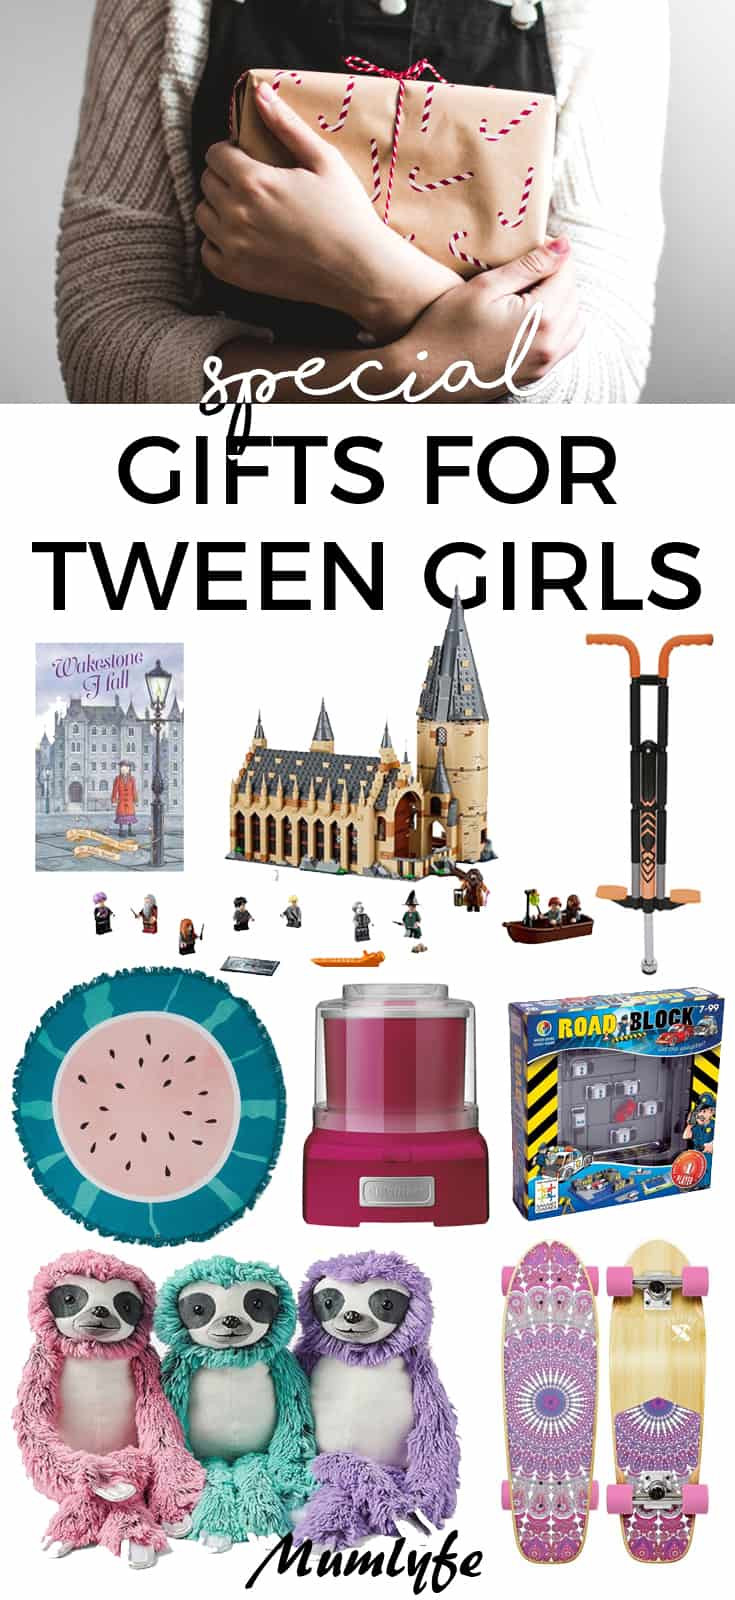 Xmas Gift Ideas For Girls
 Special t ideas for tween girls best t list for